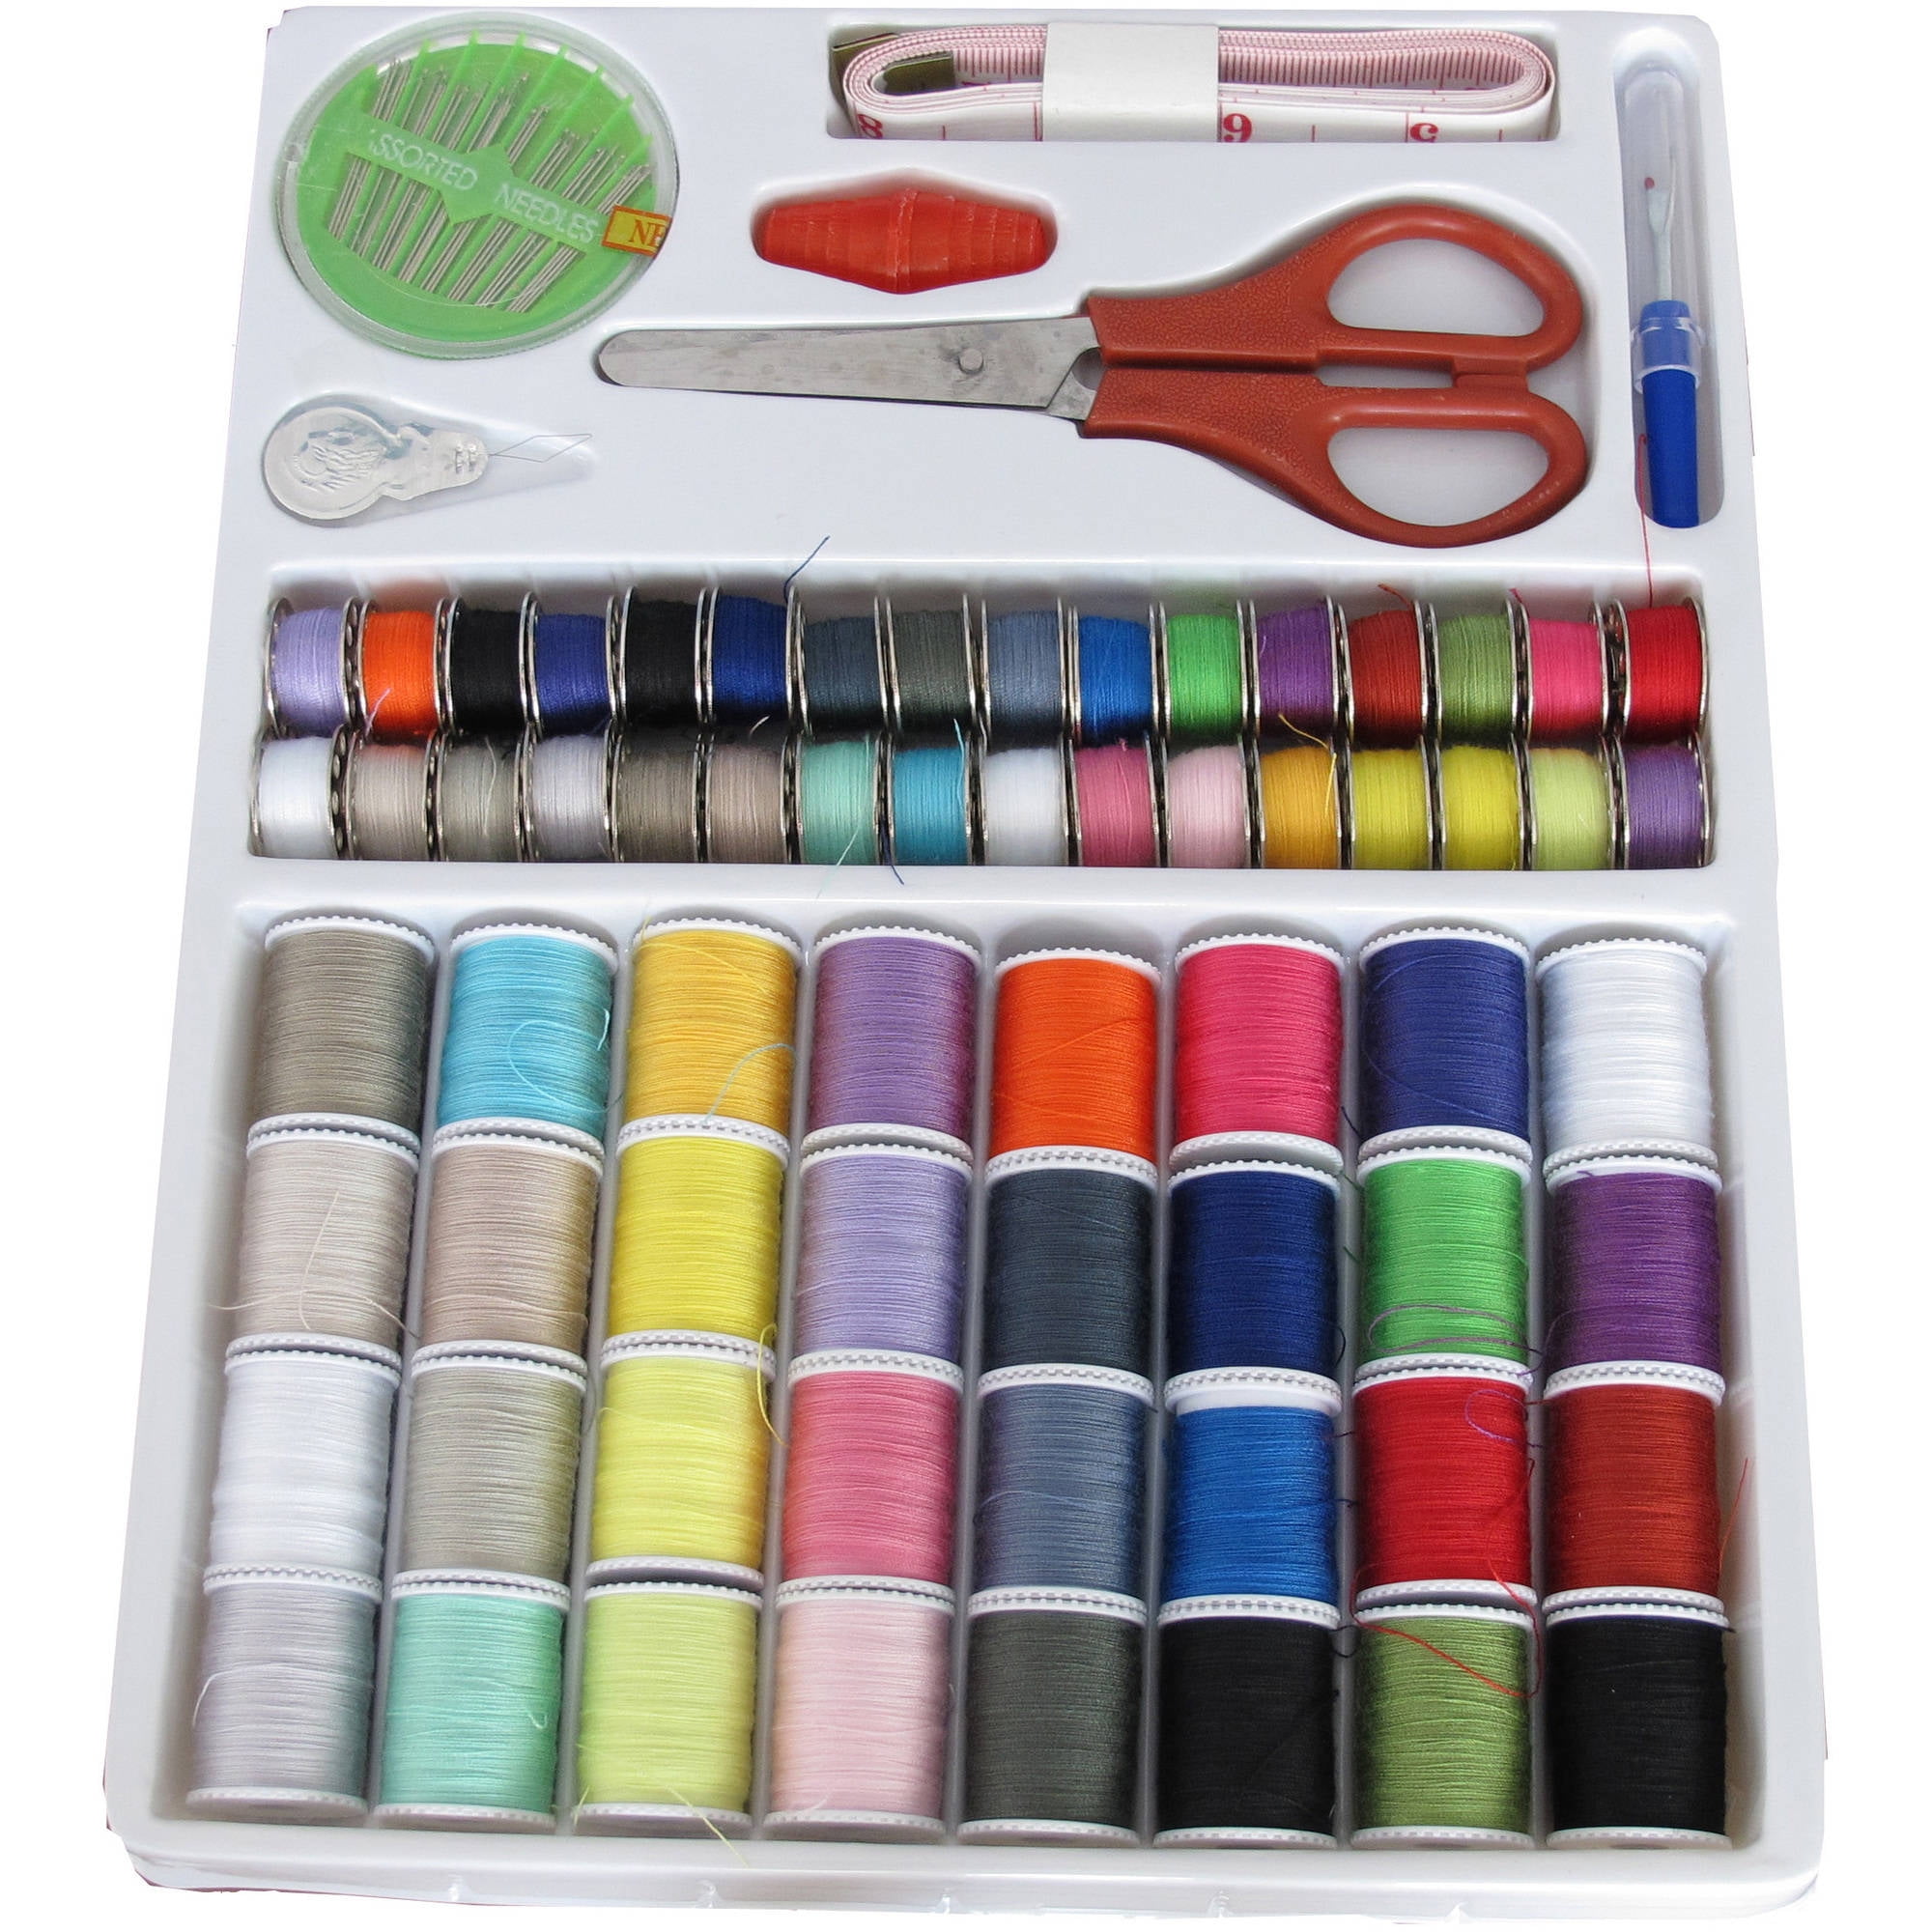 Sewing Kit With 100 Sewing Supplies And Accessories - 24-Color Threads,  Needle And Thread Kit Products For Small Fixes, Basic Mini Travel Sewing  Kit F